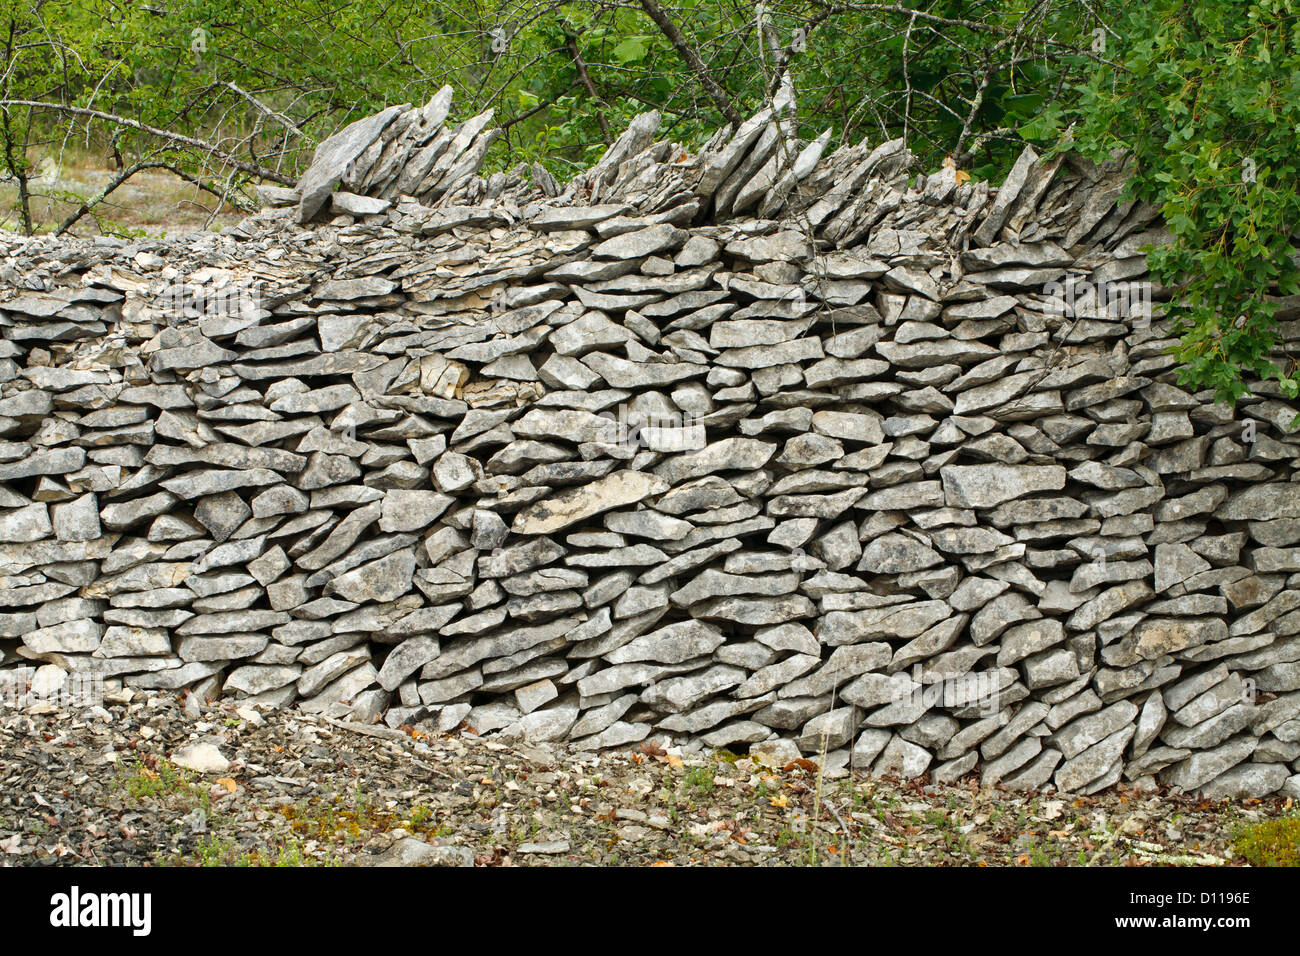 Decaying stone wall made of limestone, on the Causse de Gramat, Lot region, France. June. Stock Photo